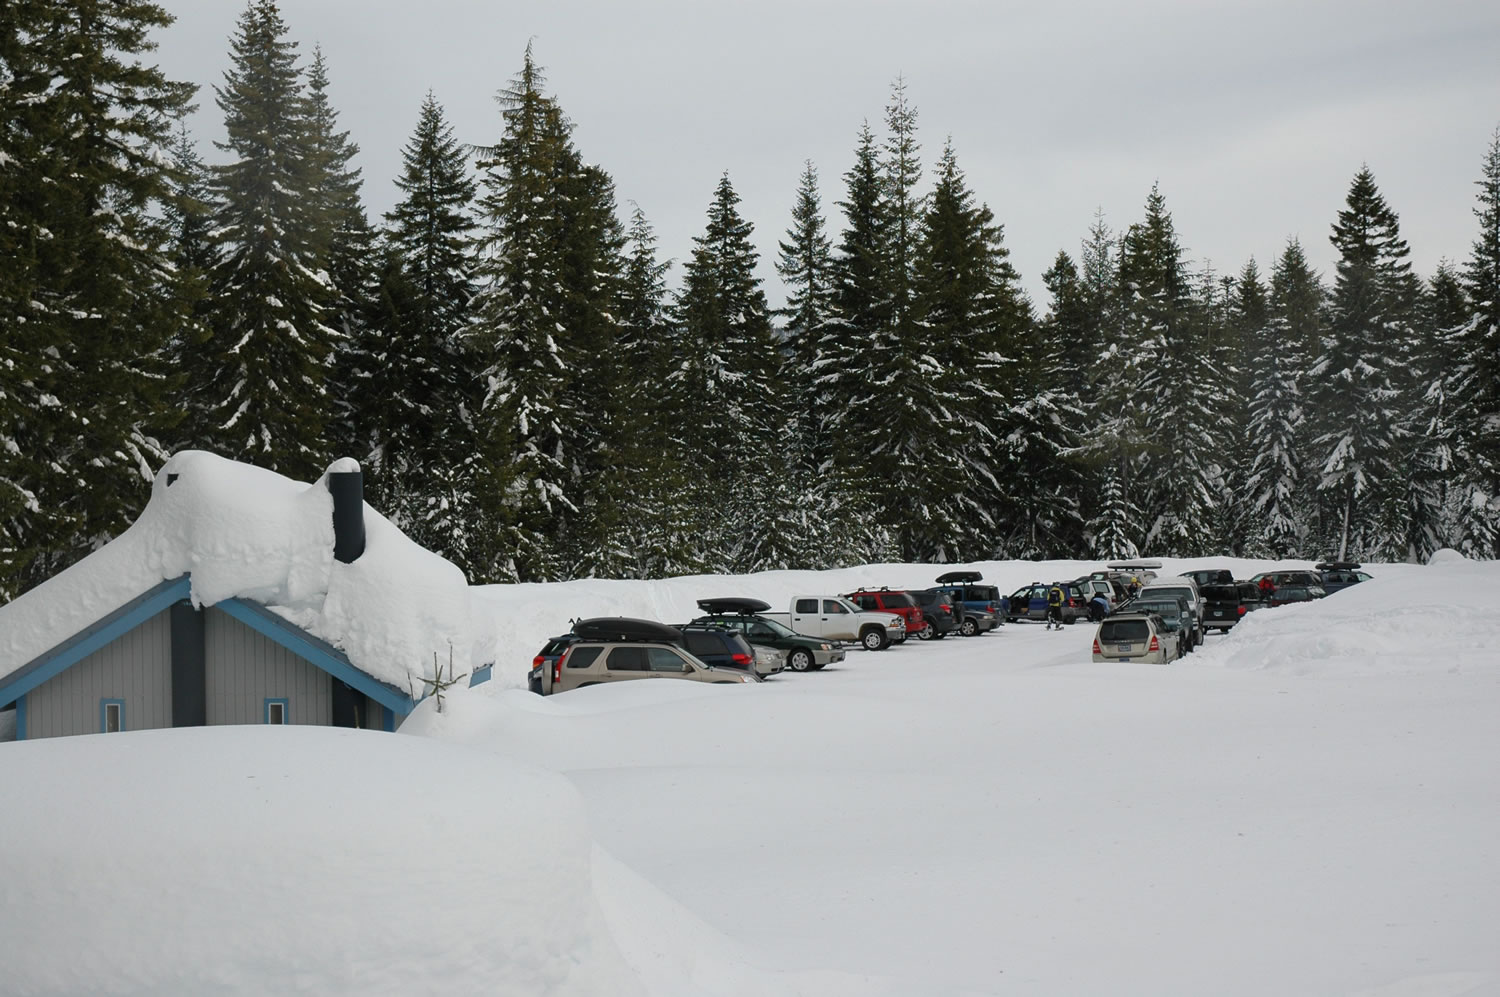 Koshko Sno-Park at the Upper Wind River Sports Area will be designated for snowmobile use this winter